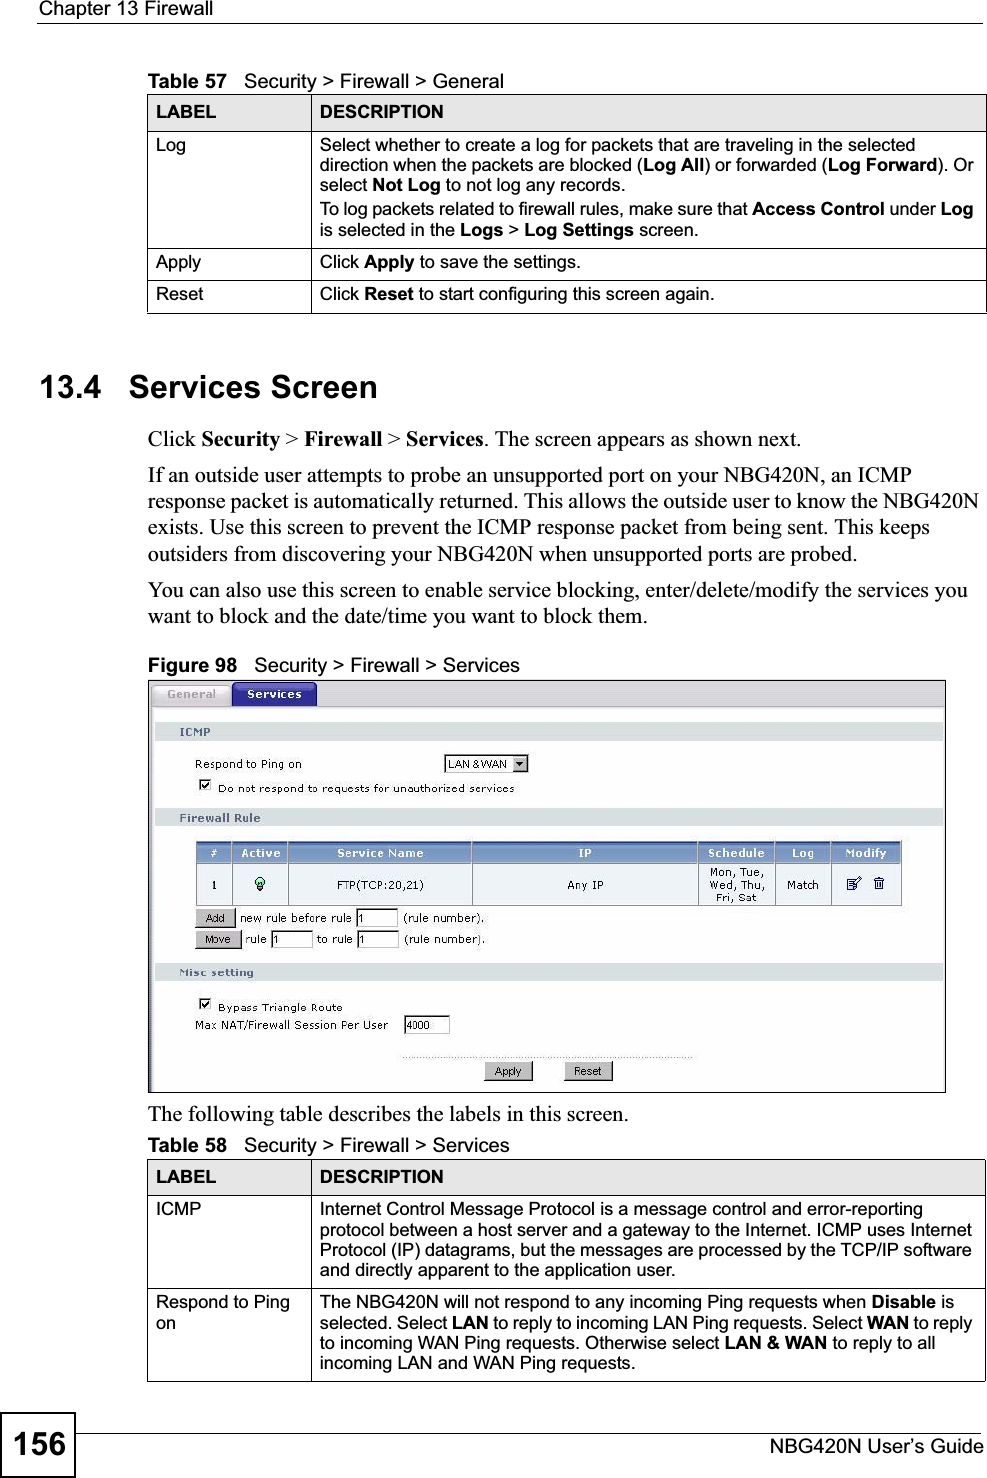 Chapter 13 FirewallNBG420N User’s Guide15613.4   Services ScreenClick Security &gt; Firewall &gt; Services. The screen appears as shown next. If an outside user attempts to probe an unsupported port on your NBG420N, an ICMP response packet is automatically returned. This allows the outside user to know the NBG420N exists. Use this screen to prevent the ICMP response packet from being sent. This keeps outsiders from discovering your NBG420N when unsupported ports are probed.You can also use this screen to enable service blocking, enter/delete/modify the services you want to block and the date/time you want to block them.Figure 98   Security &gt; Firewall &gt; Services The following table describes the labels in this screen.Log Select whether to create a log for packets that are traveling in the selected direction when the packets are blocked (Log All) or forwarded (Log Forward). Or select Not Log to not log any records.To log packets related to firewall rules, make sure that Access Control under Logis selected in the Logs &gt; Log Settings screen. Apply Click Apply to save the settings. Reset Click Reset to start configuring this screen again. Table 57   Security &gt; Firewall &gt; General LABEL DESCRIPTIONTable 58   Security &gt; Firewall &gt; ServicesLABEL DESCRIPTIONICMP Internet Control Message Protocol is a message control and error-reporting protocol between a host server and a gateway to the Internet. ICMP uses Internet Protocol (IP) datagrams, but the messages are processed by the TCP/IP software and directly apparent to the application user. Respond to Ping onThe NBG420N will not respond to any incoming Ping requests when Disable isselected. Select LAN to reply to incoming LAN Ping requests. Select WAN to reply to incoming WAN Ping requests. Otherwise select LAN &amp; WAN to reply to all incoming LAN and WAN Ping requests. 